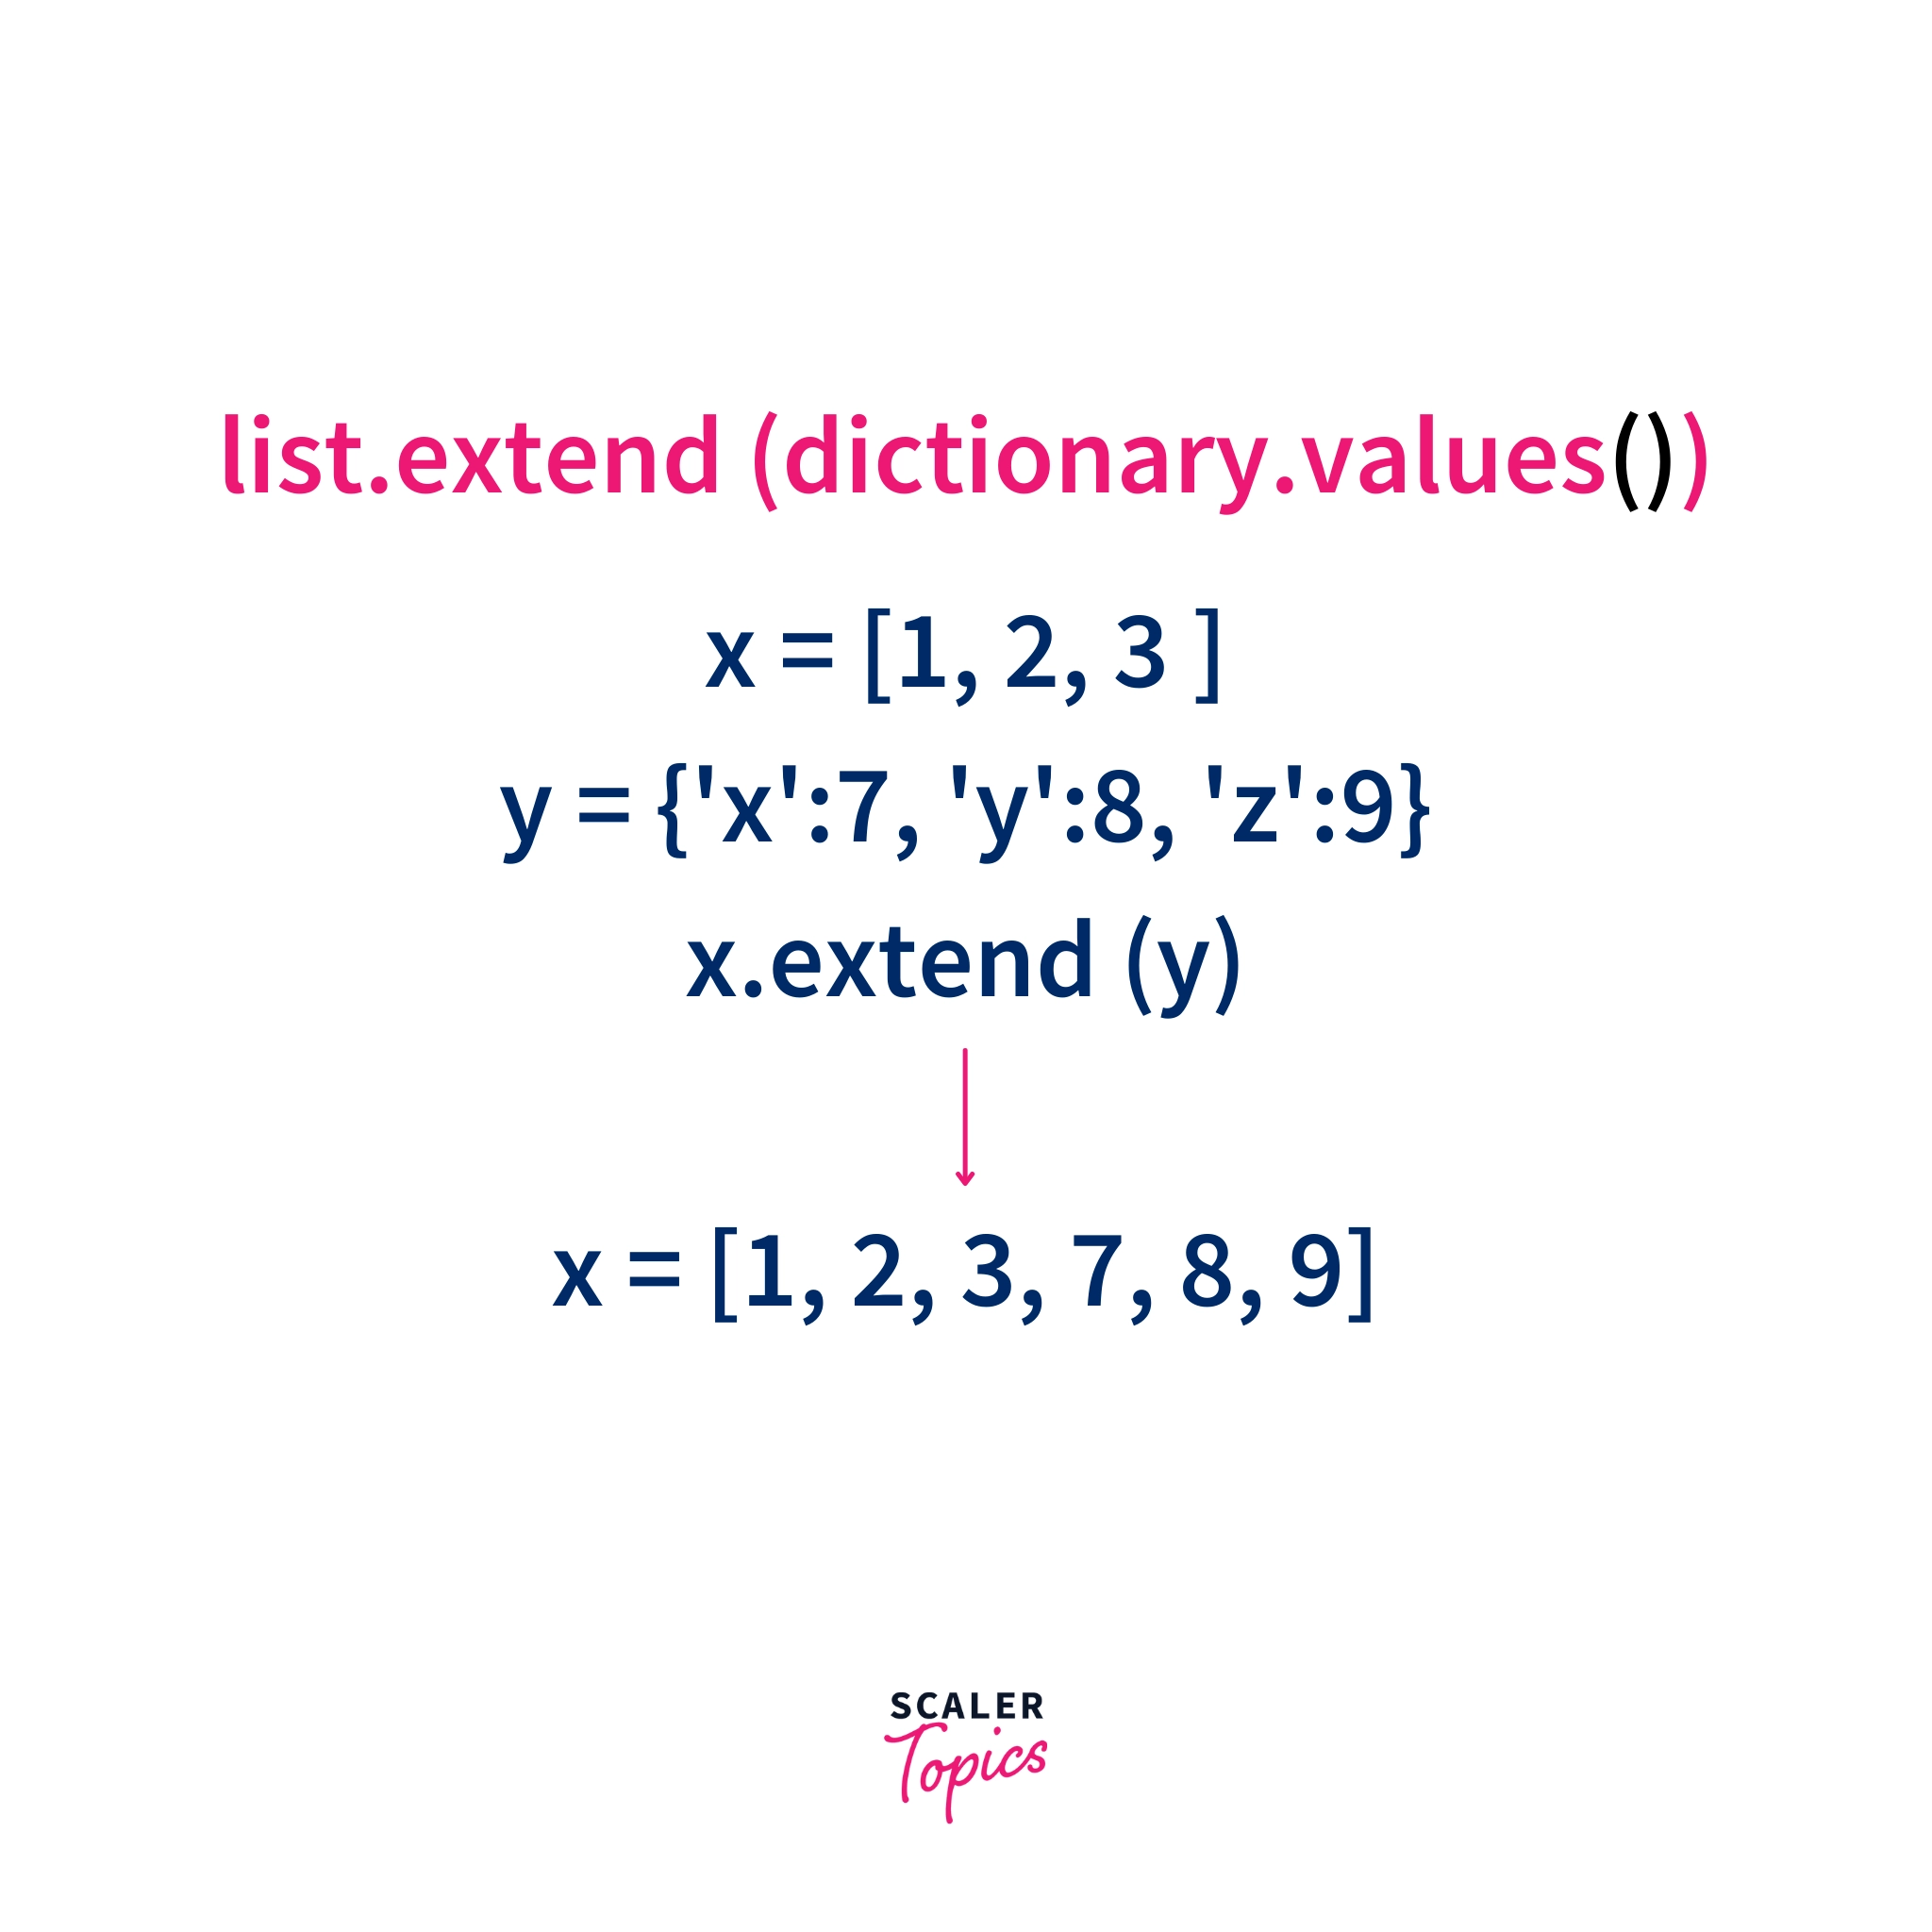 List extend() vs append() in Python